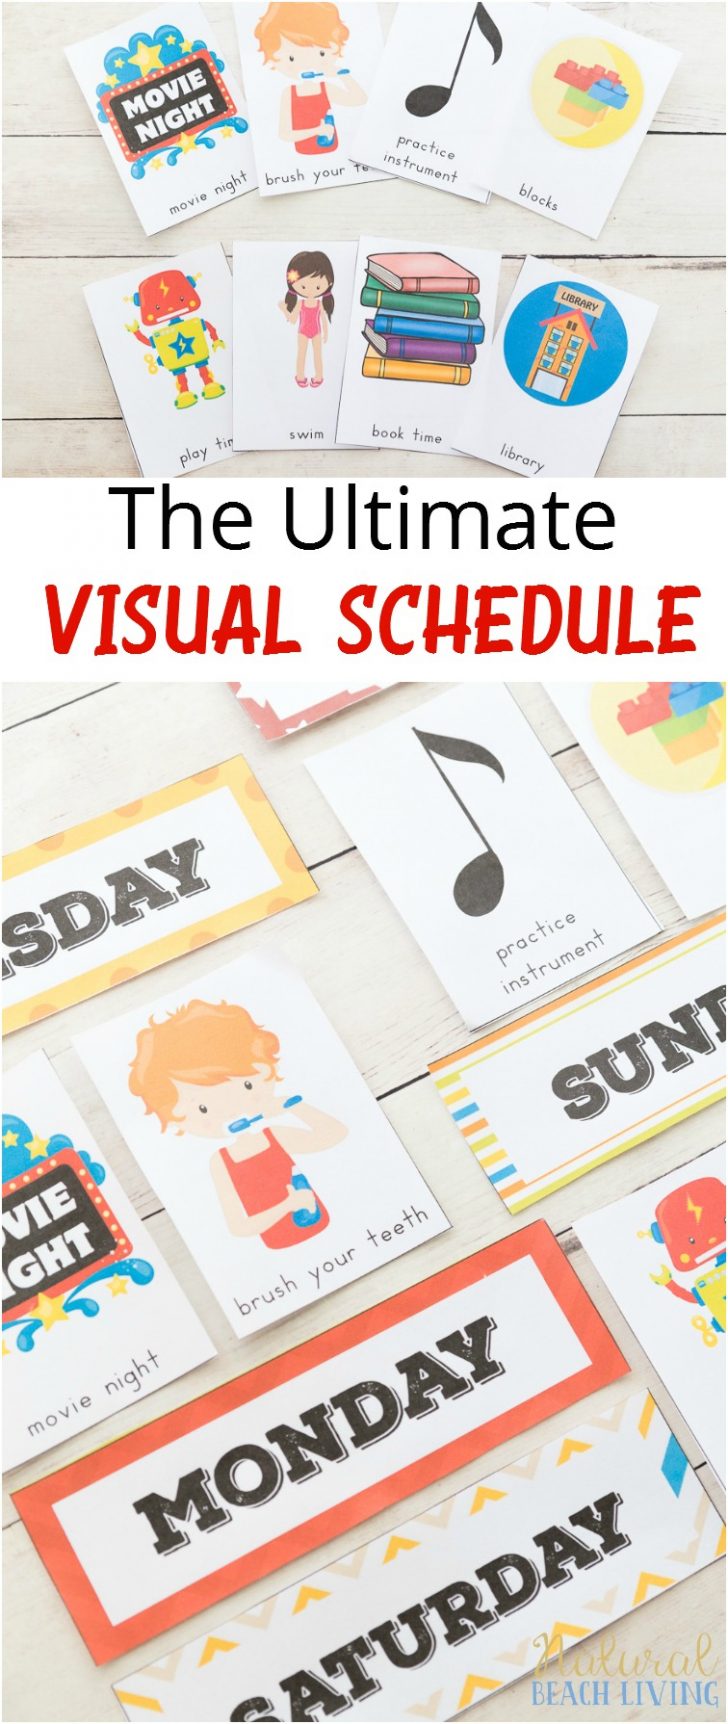 Free Printable Daily Routine Picture Cards